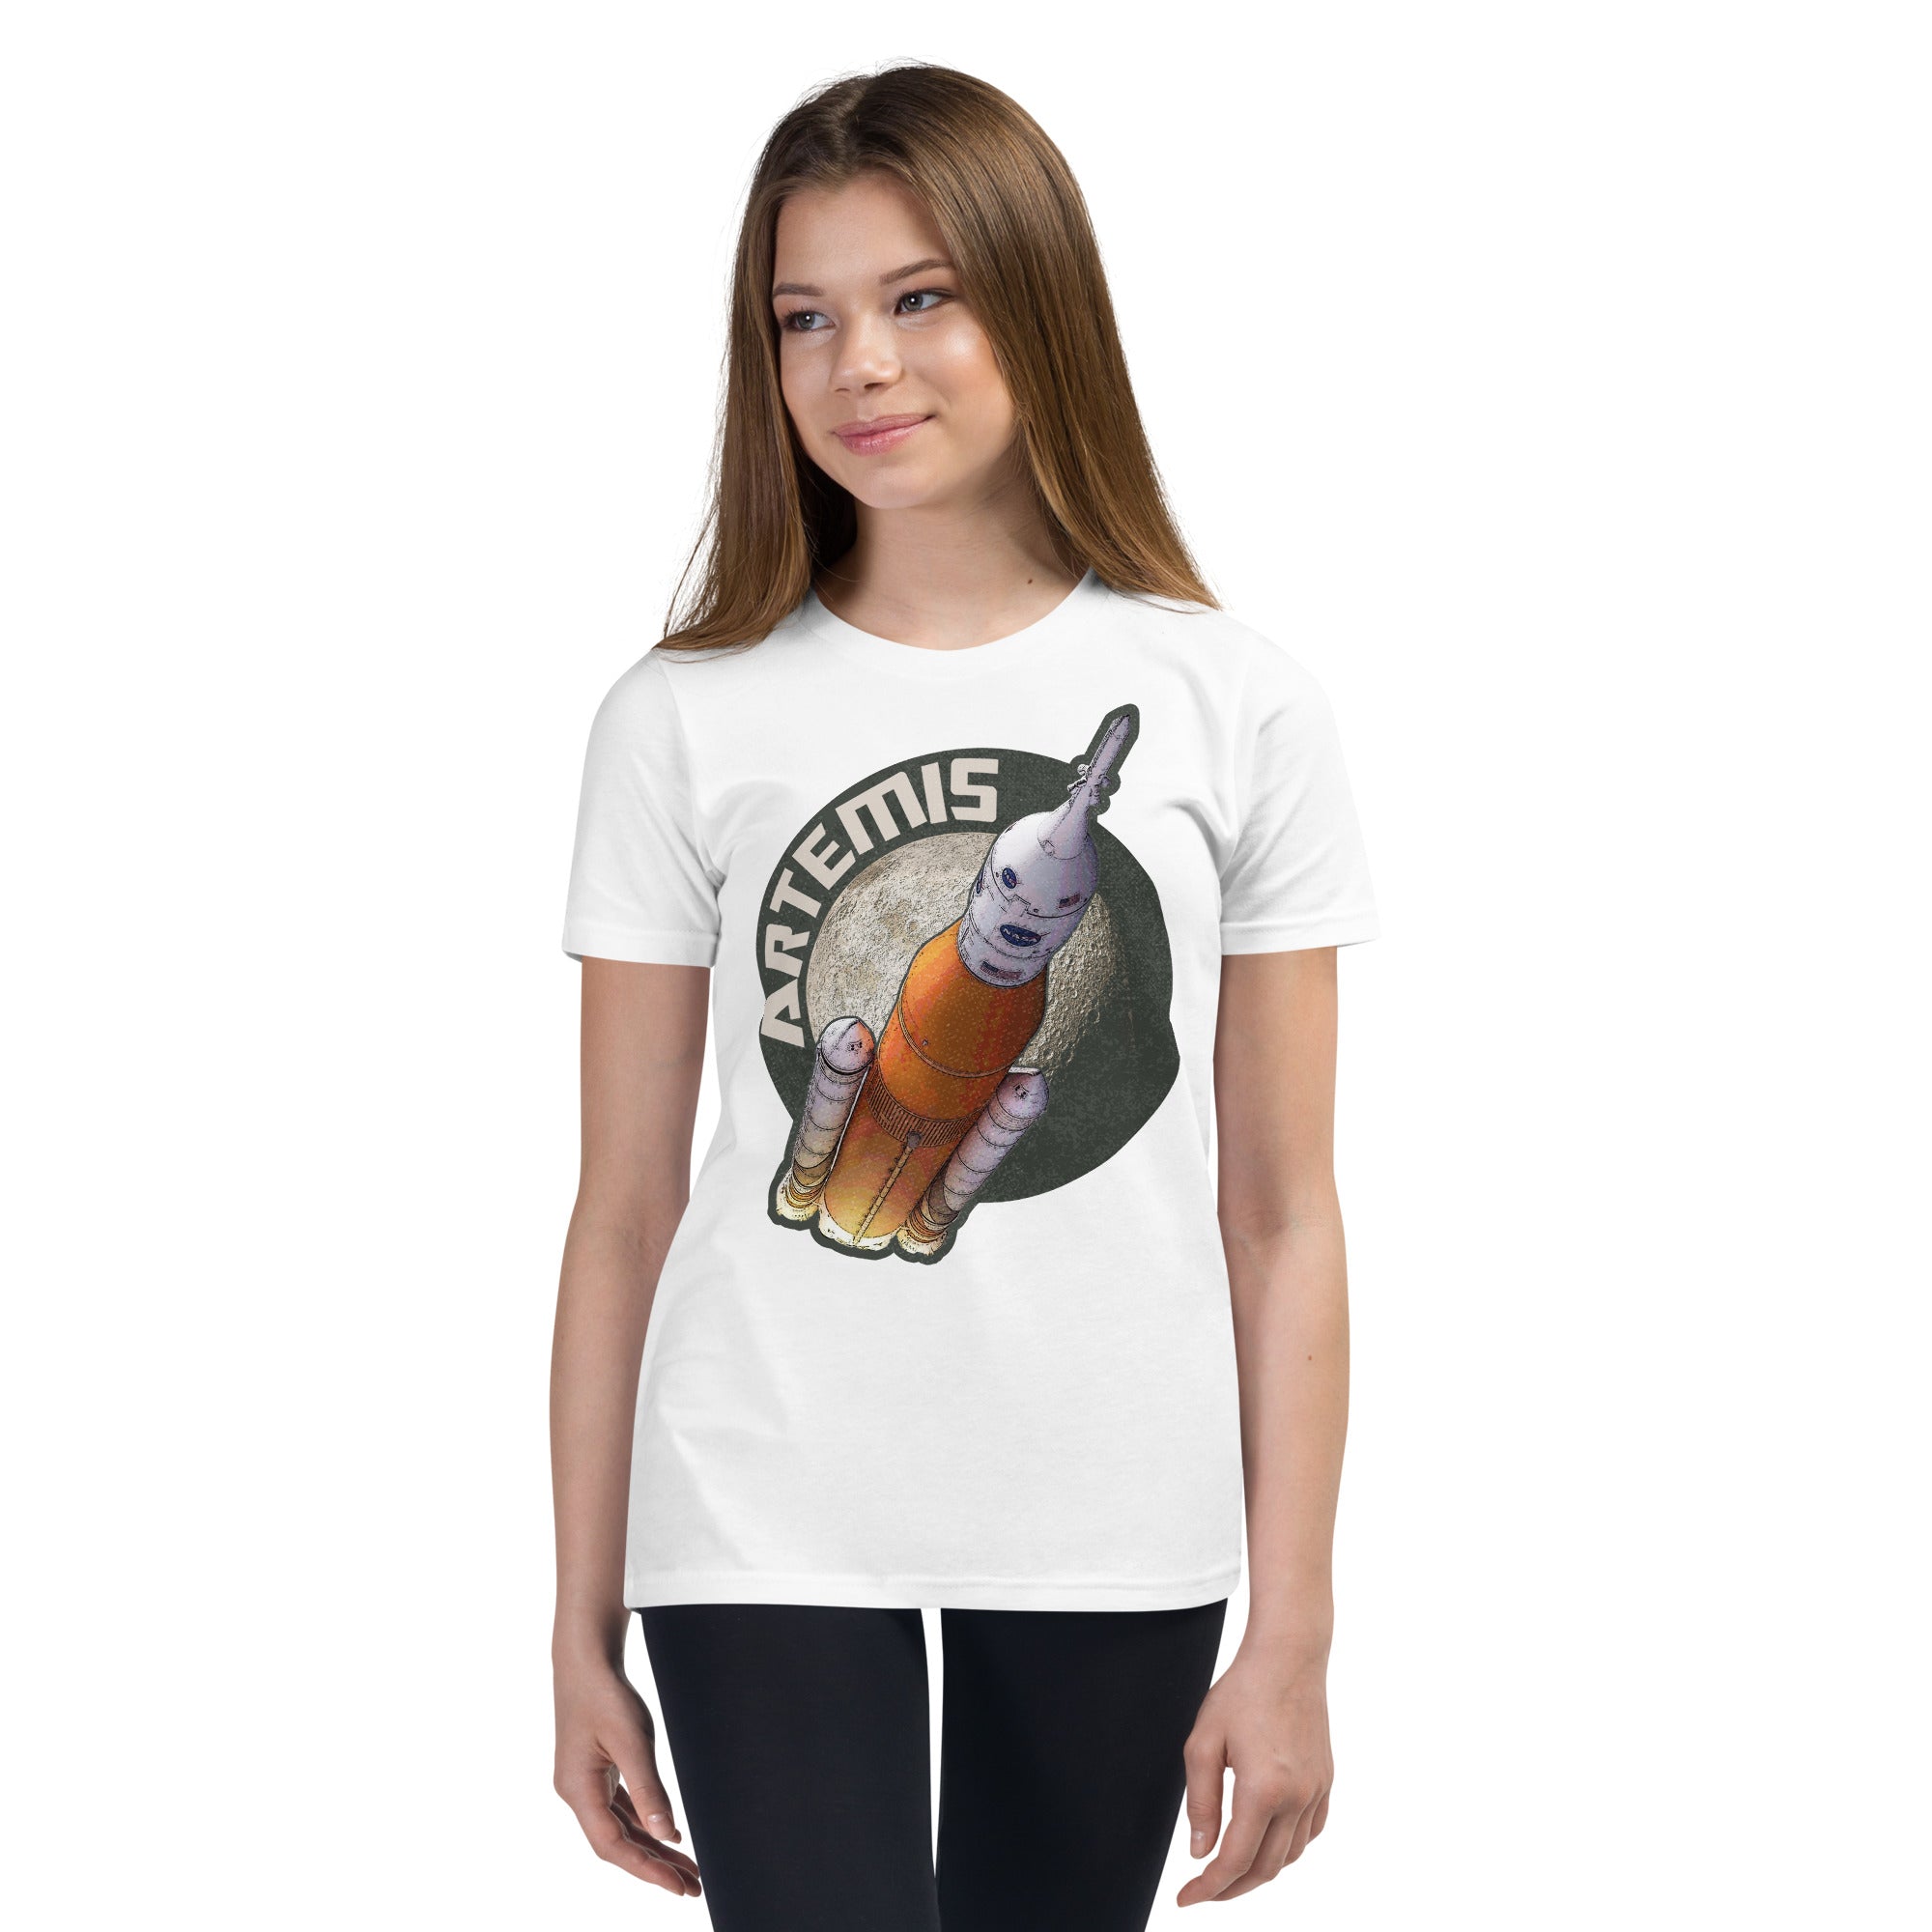 ARTEMIS SLS Rocket Youth T Shirt - The Space Store